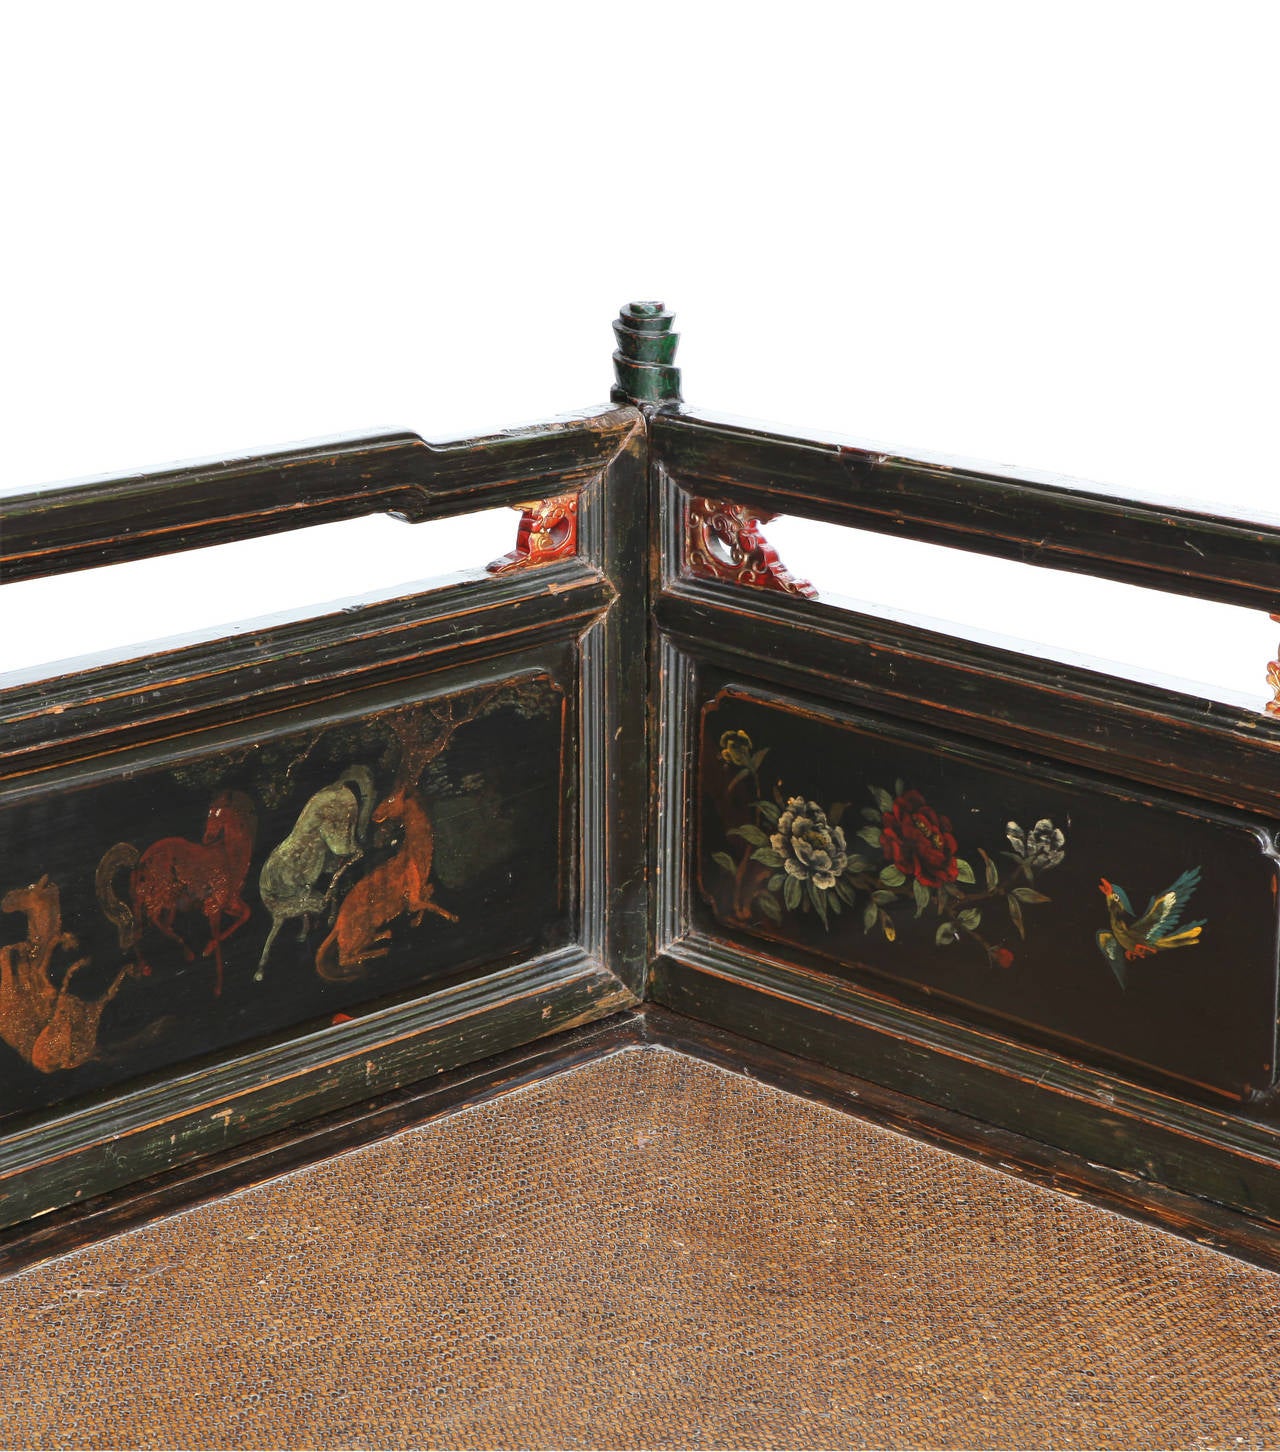 Beautiful Chinese opium bed, dating from Qing dynasty. The panels of backrest are hand-painted with flowers, landscapes, horses and scenes of everyday life. The seat is made of rattan and at the bottom there is fine decoration carved with